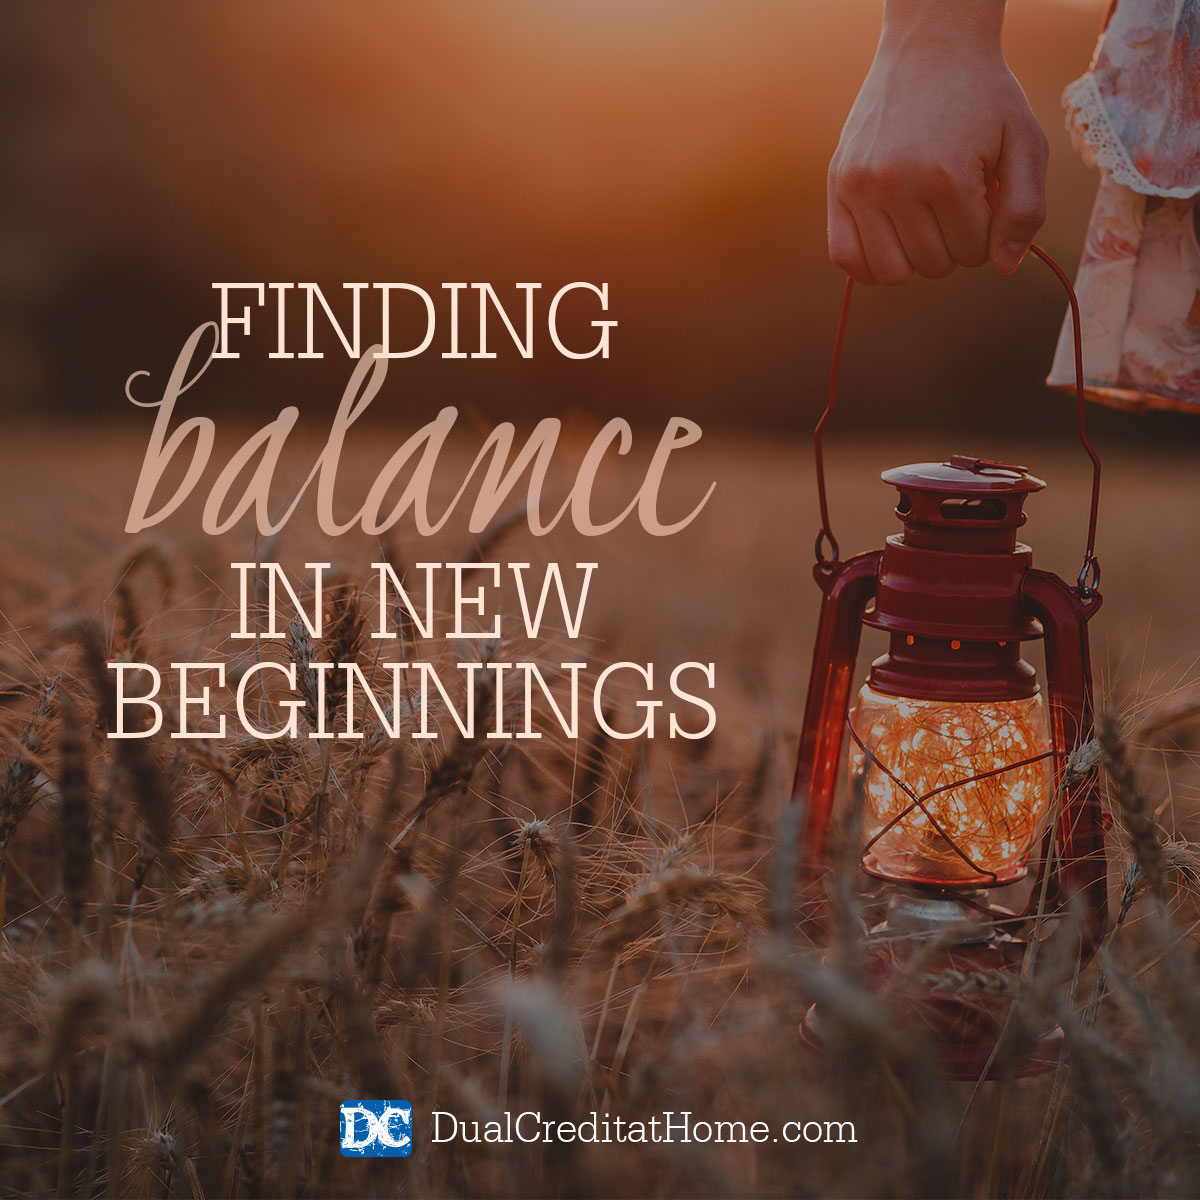 Finding Balance in New Beginnings